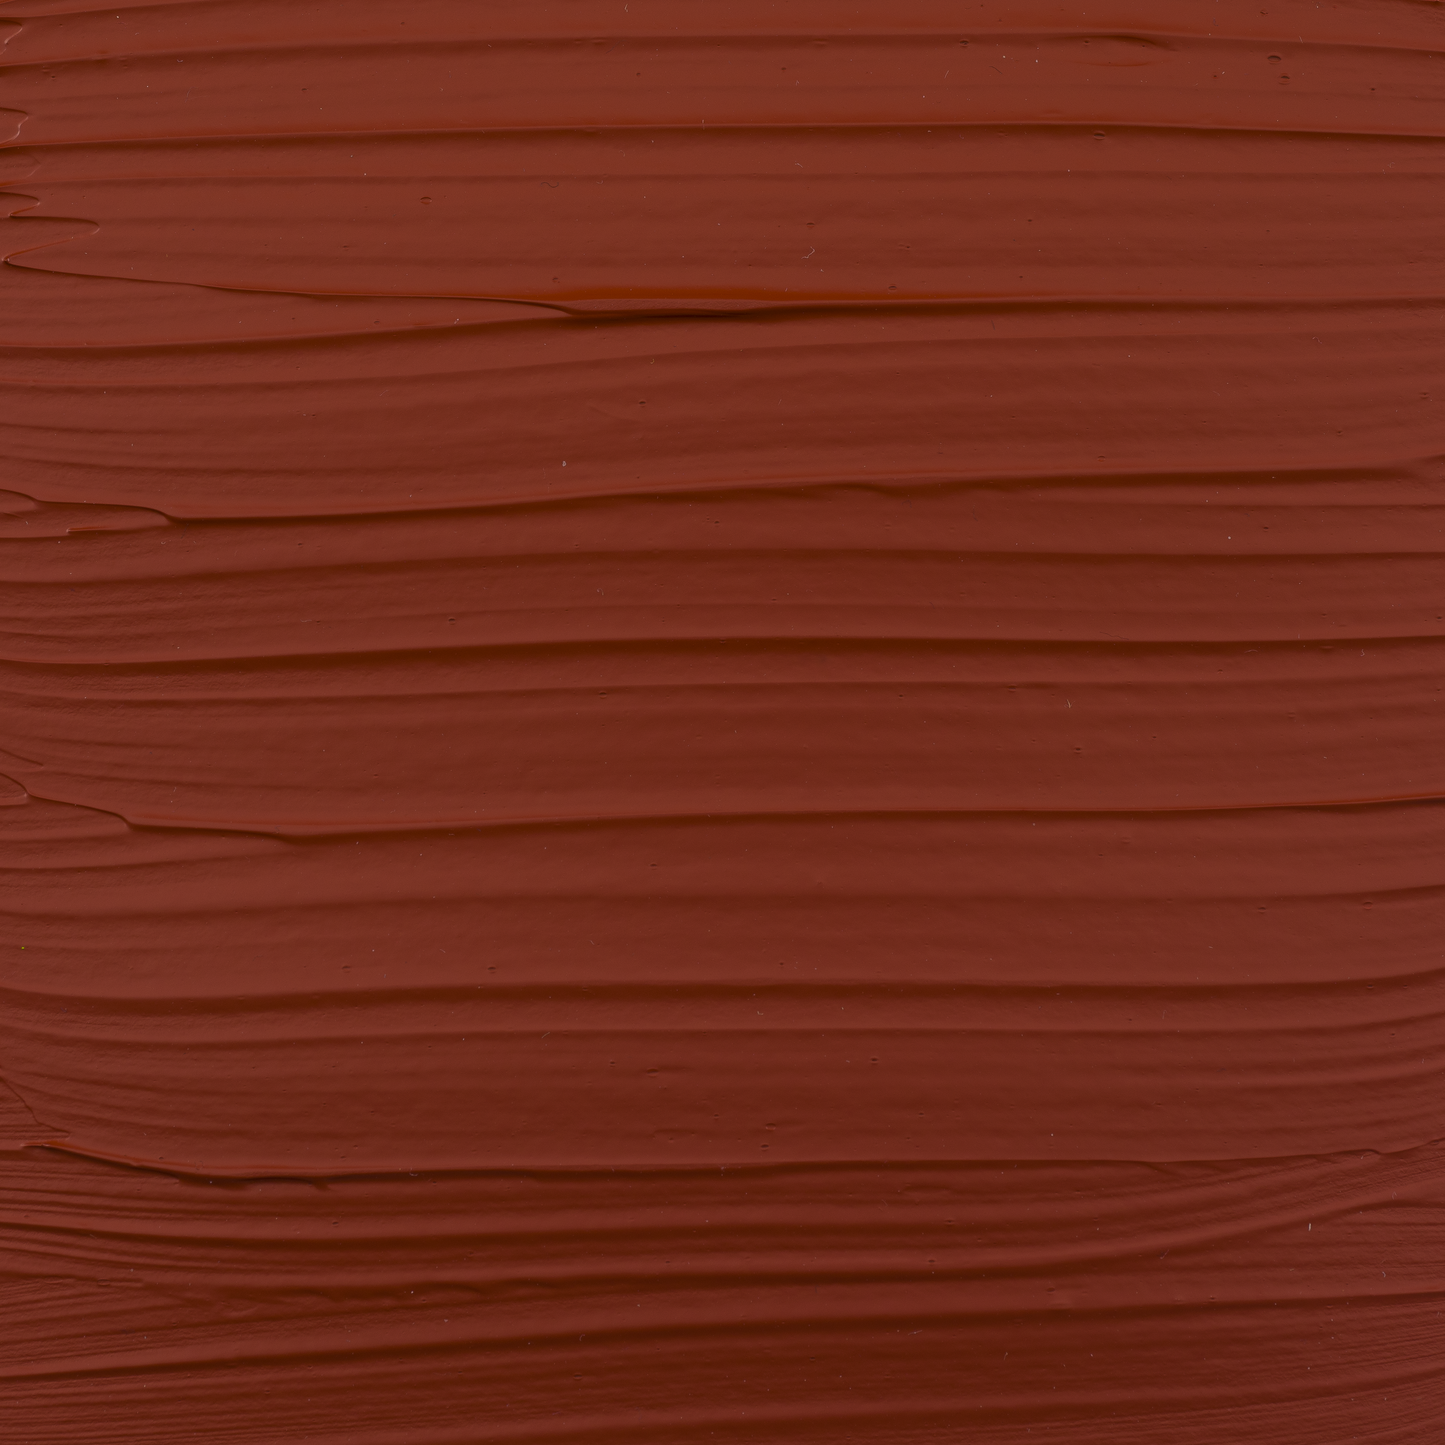 Amsterdam Expert Acrylic Paints : Light Oxide Red 339